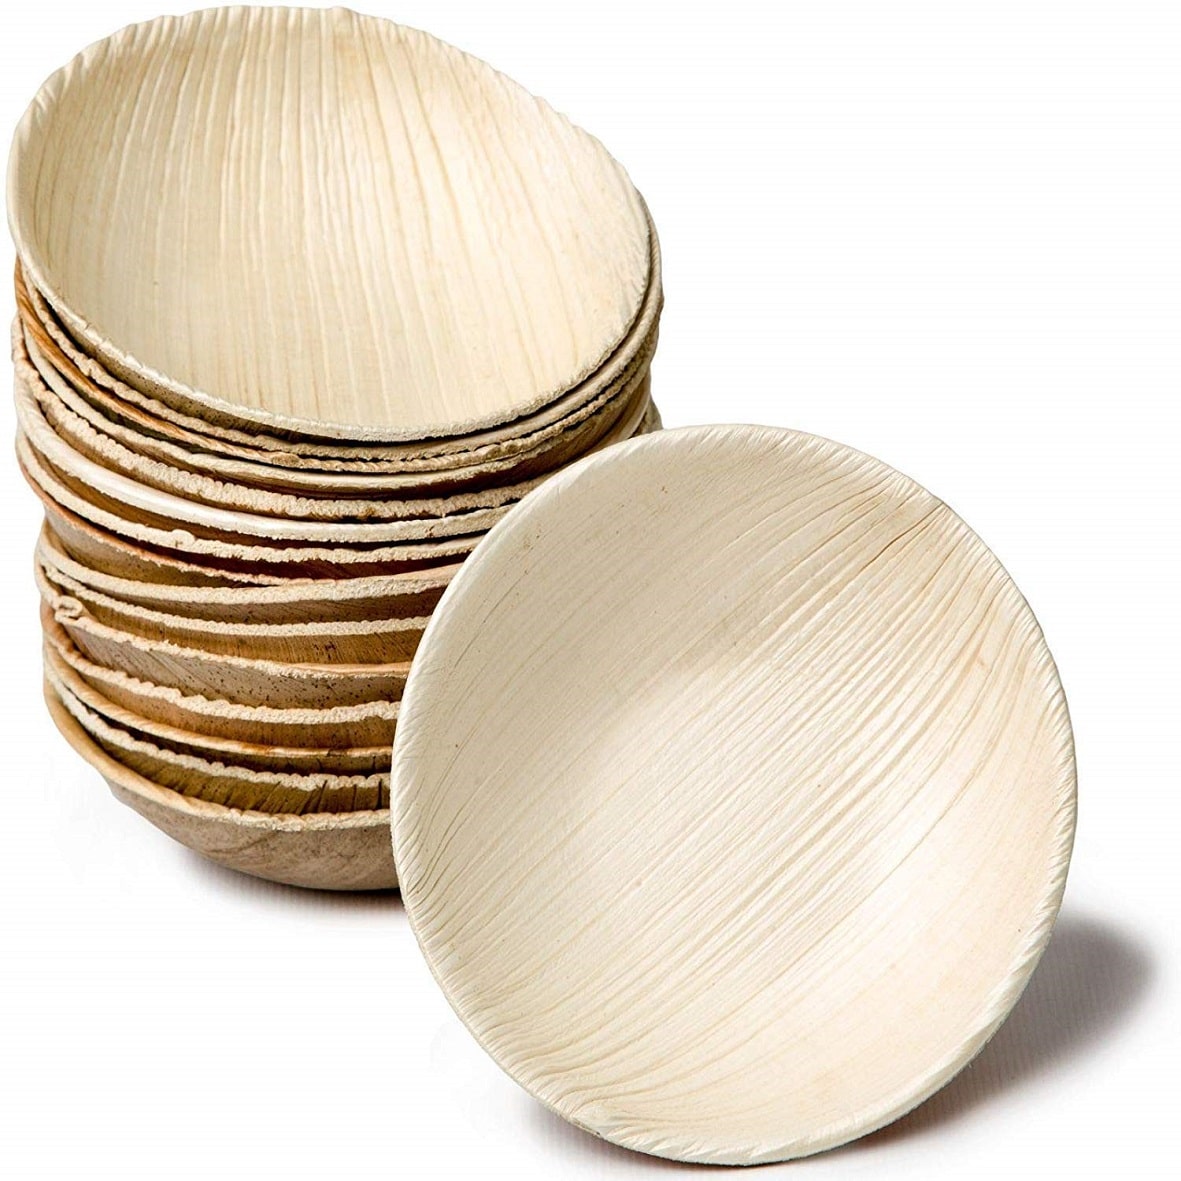 Areca Leaf Bowl 4 inch Disposable Small Round Bowls( Pack of 25)